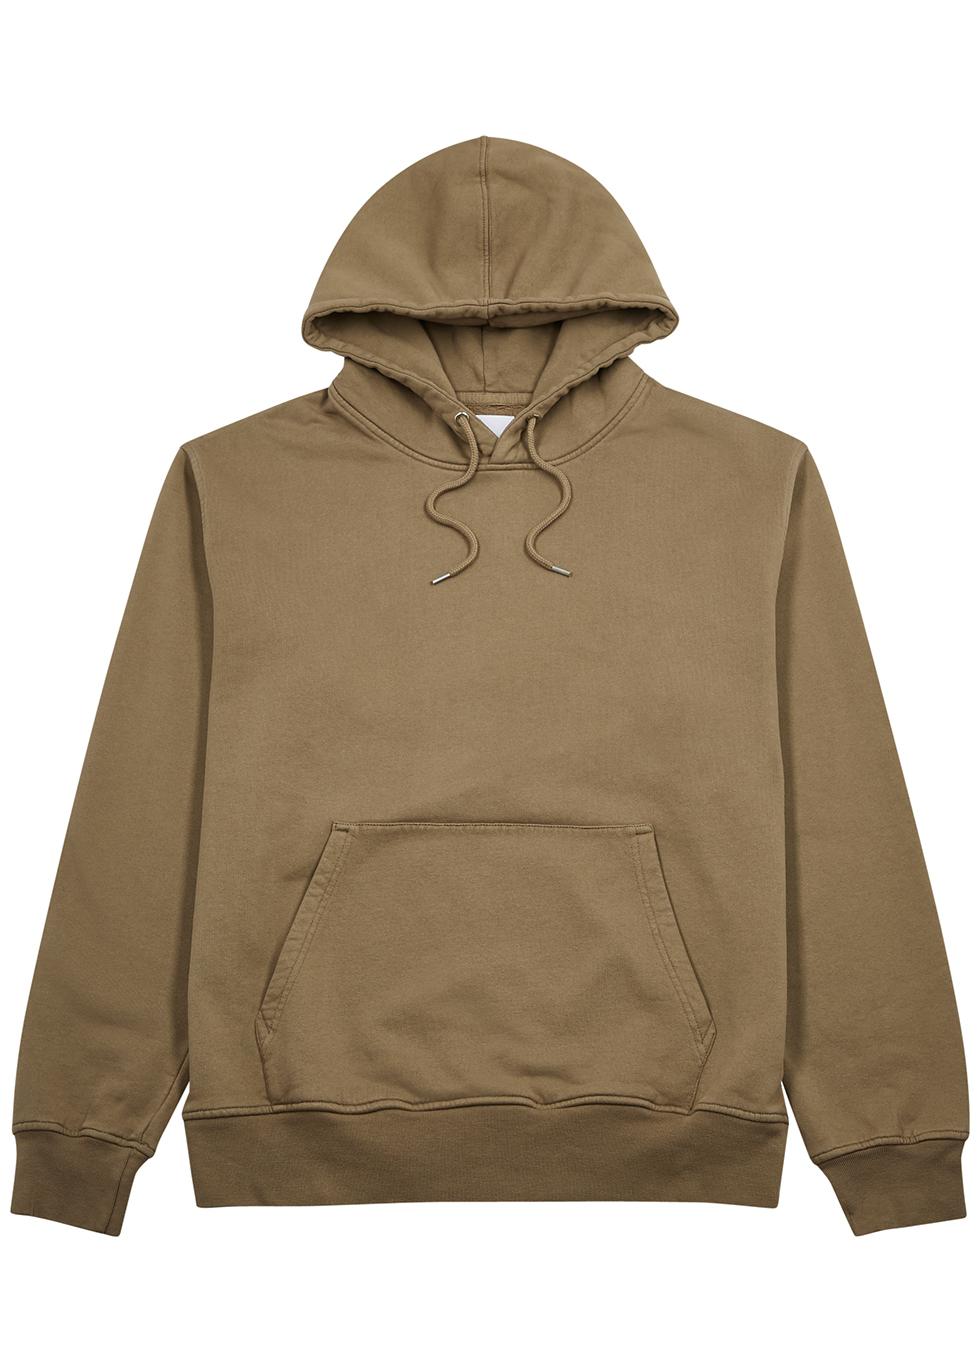 Brown hoodied cotton sweatshirt by COLORFUL STANDARD